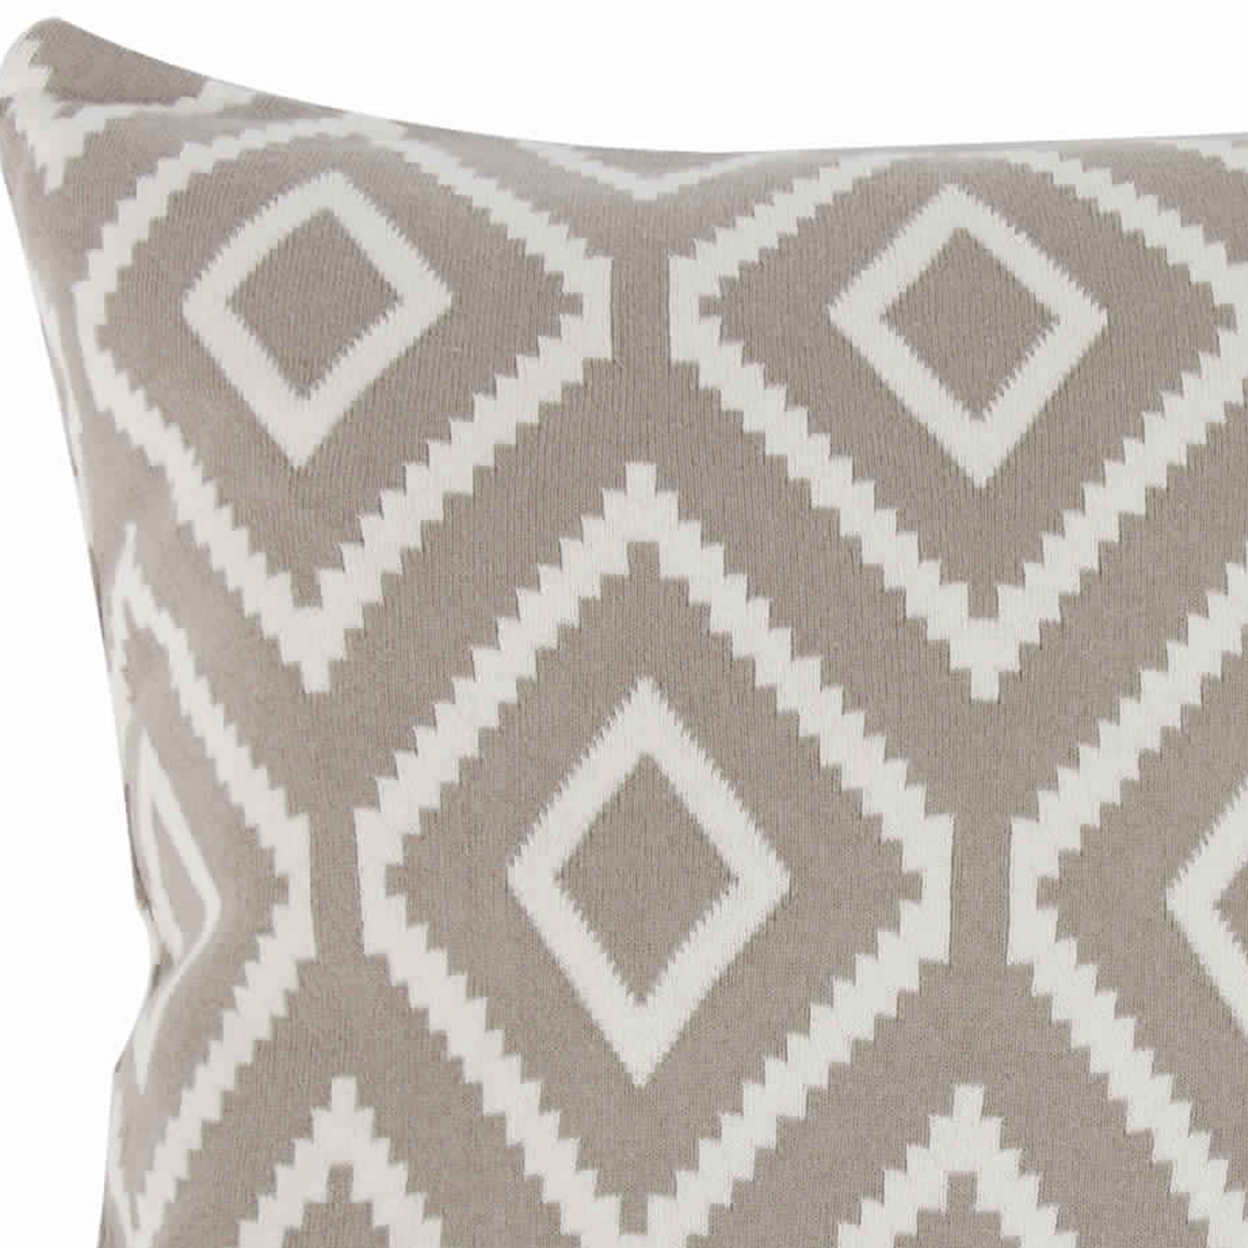 20 X 20 Inch Cashmere Pillow With Diamond Pattern, Set Of 2, Brown And White- Saltoro Sherpi